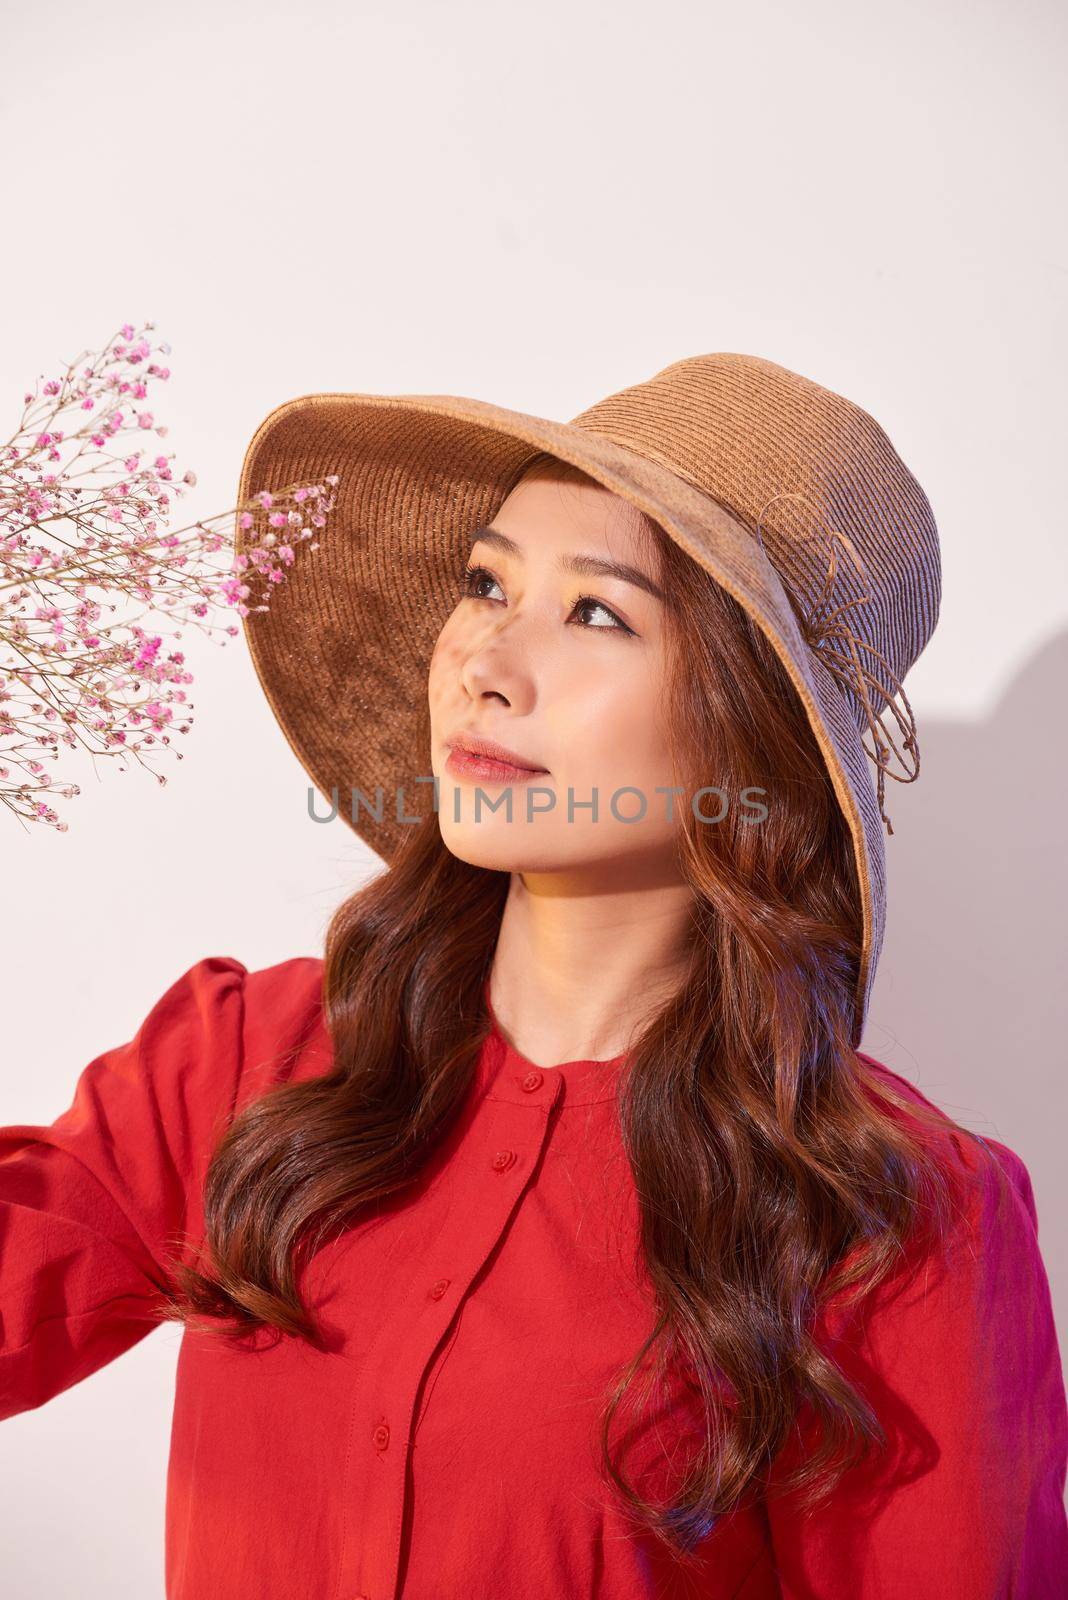 a lovely young woman in summer dress and straw hat posing while holding bouquet flowers